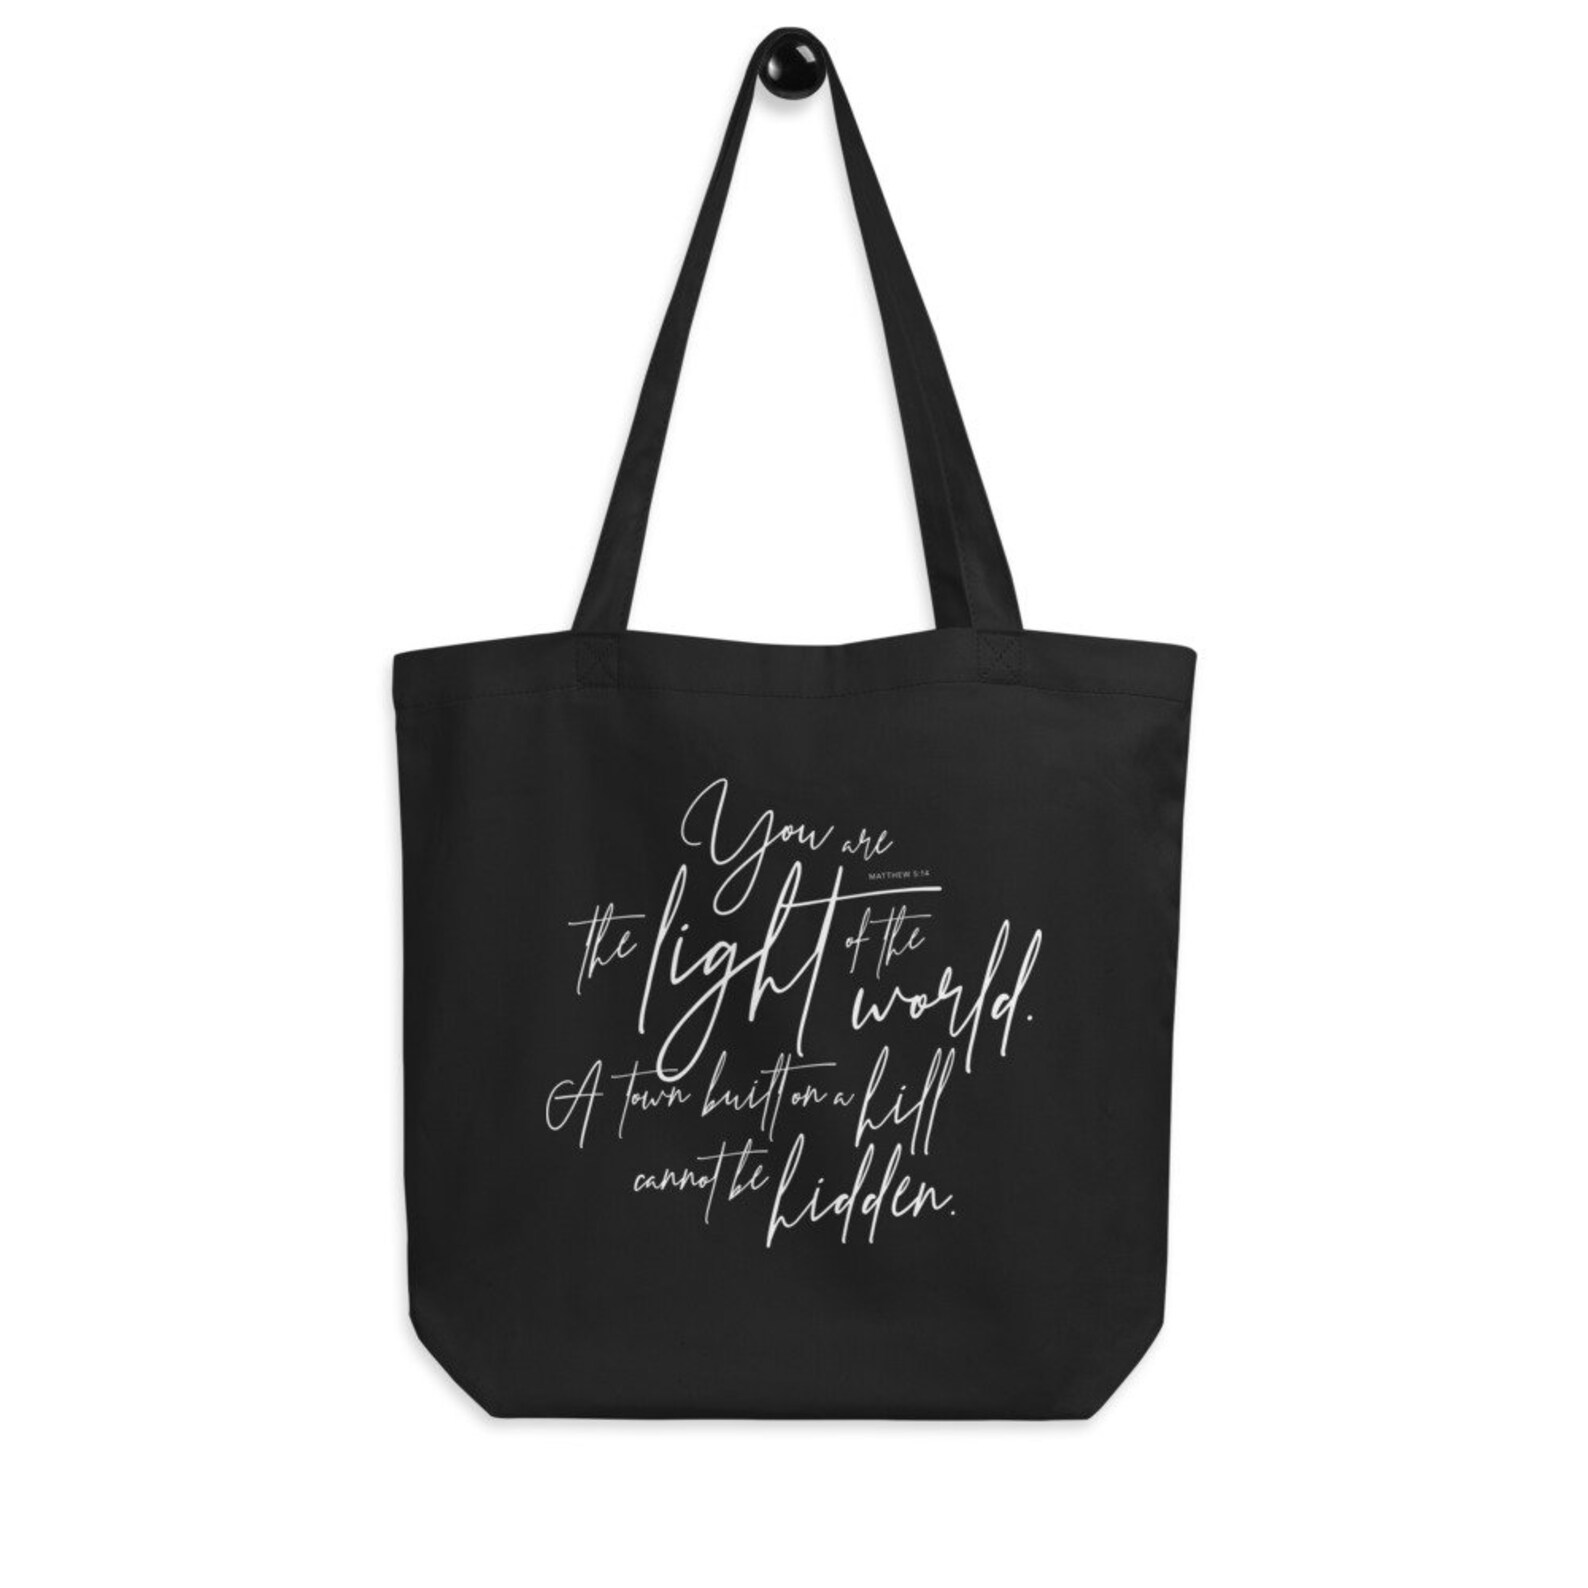 Christian Tote Bags Bible Scripture Tote Bag Organic Cotton - Etsy ...